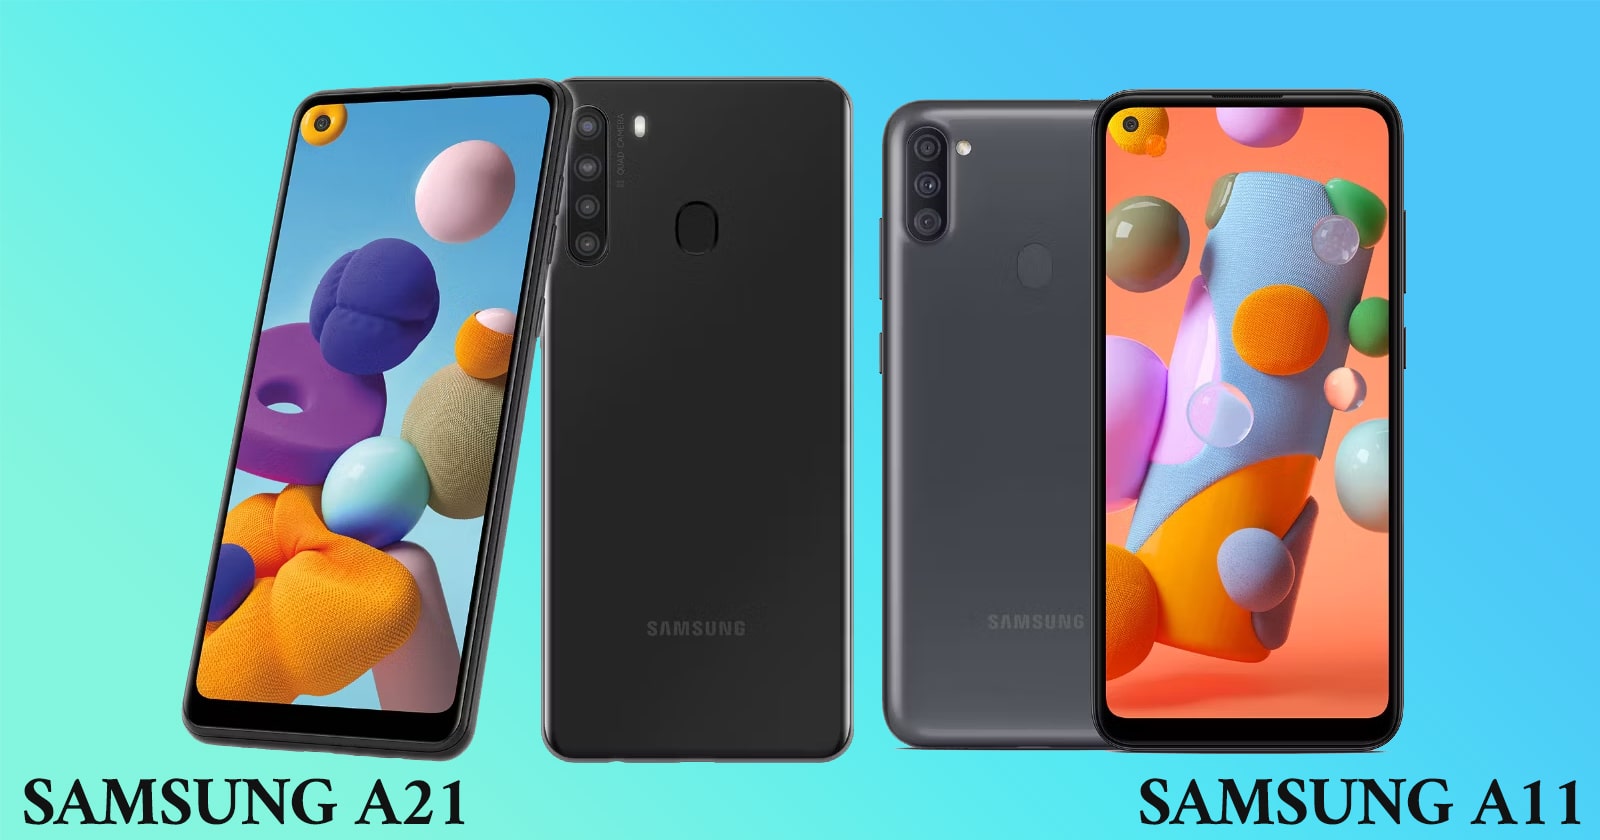 What Is the Difference Between Samsung A11 and A21